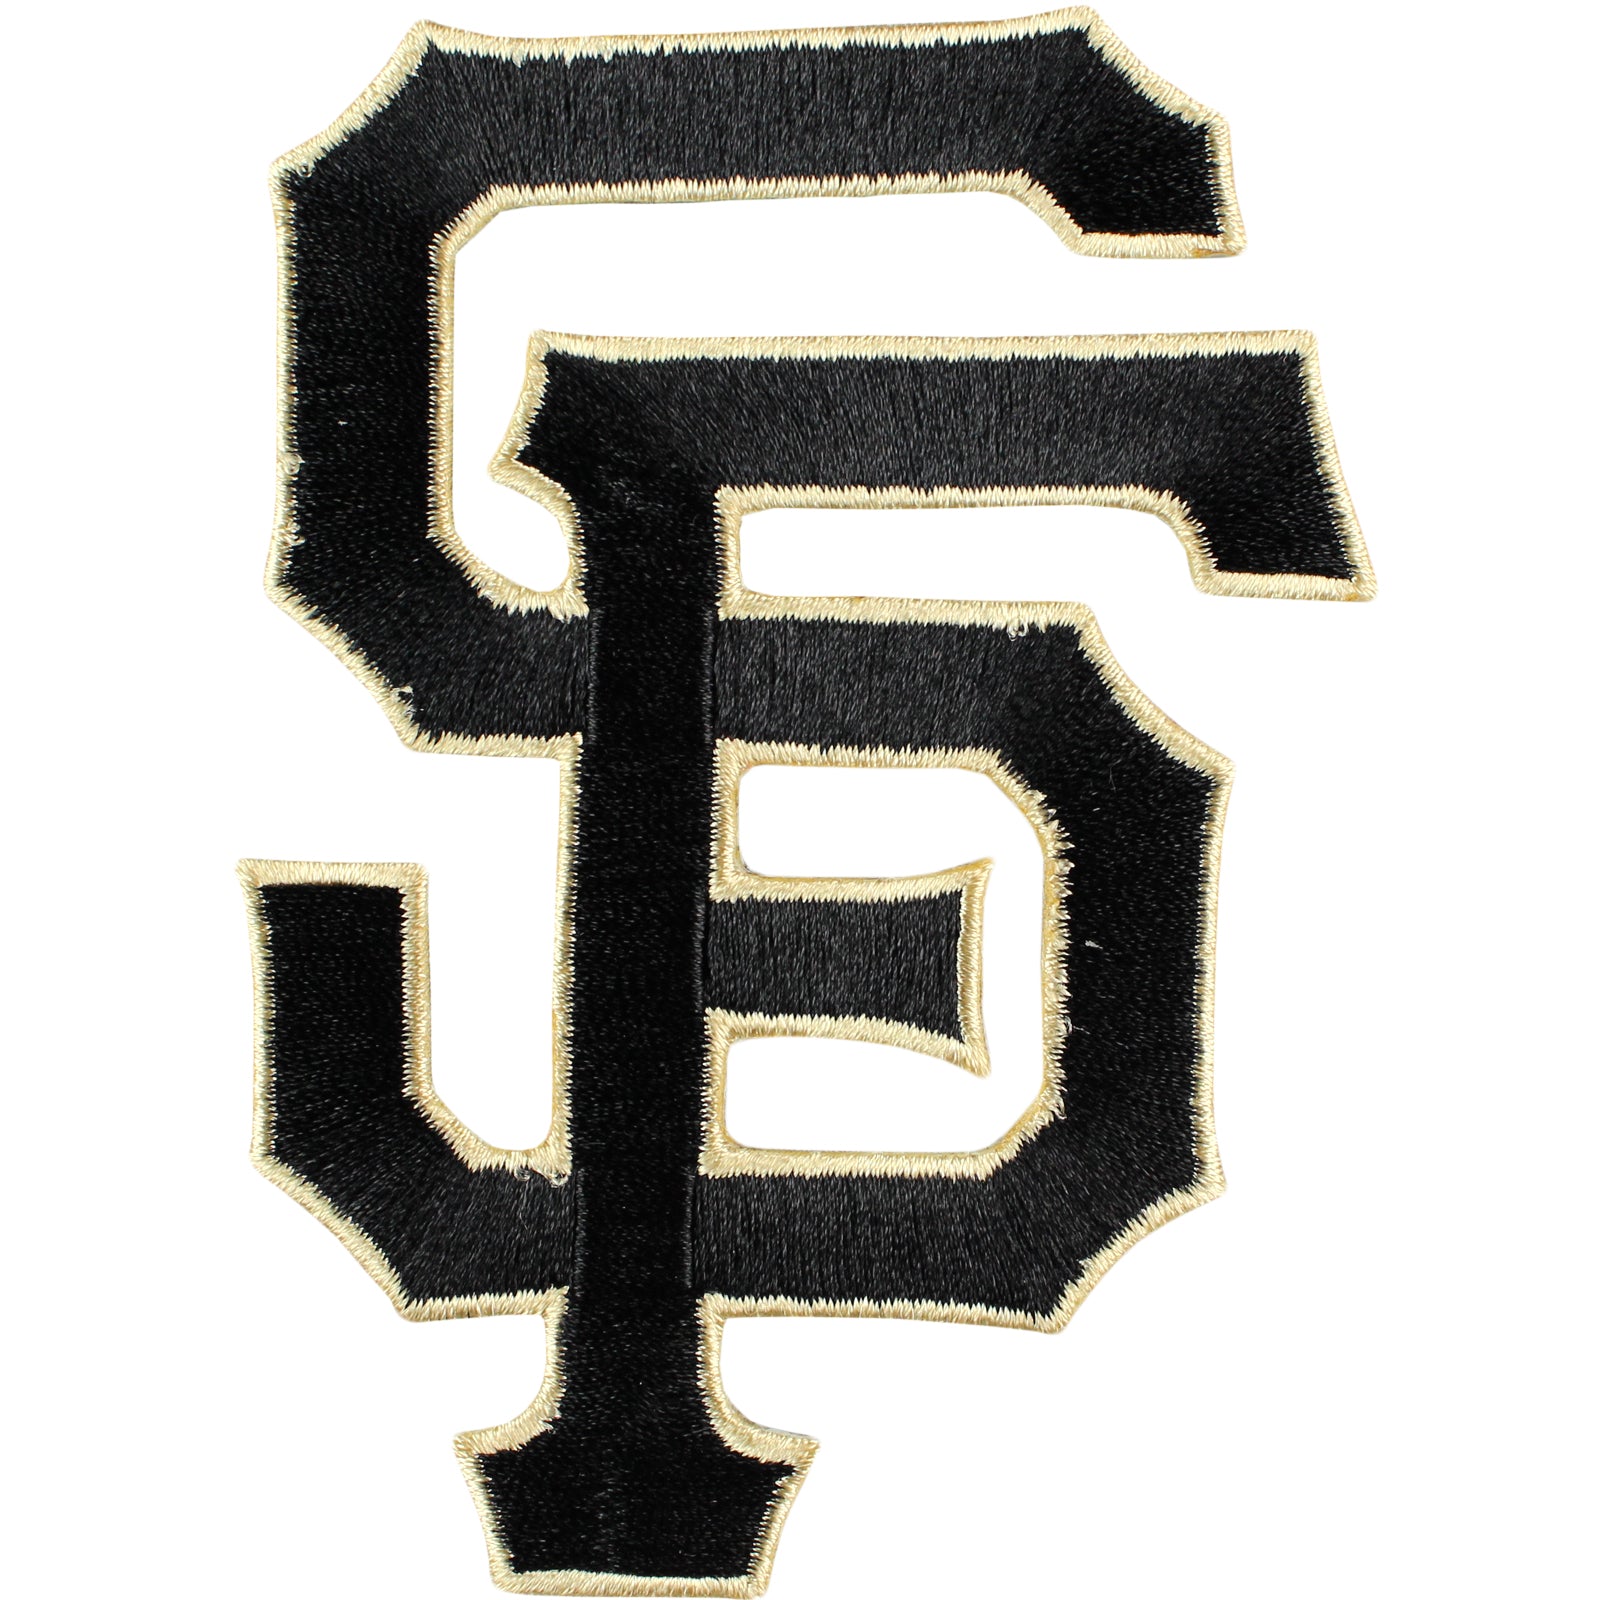 Would you want to see the Giants have a black alternate jersey